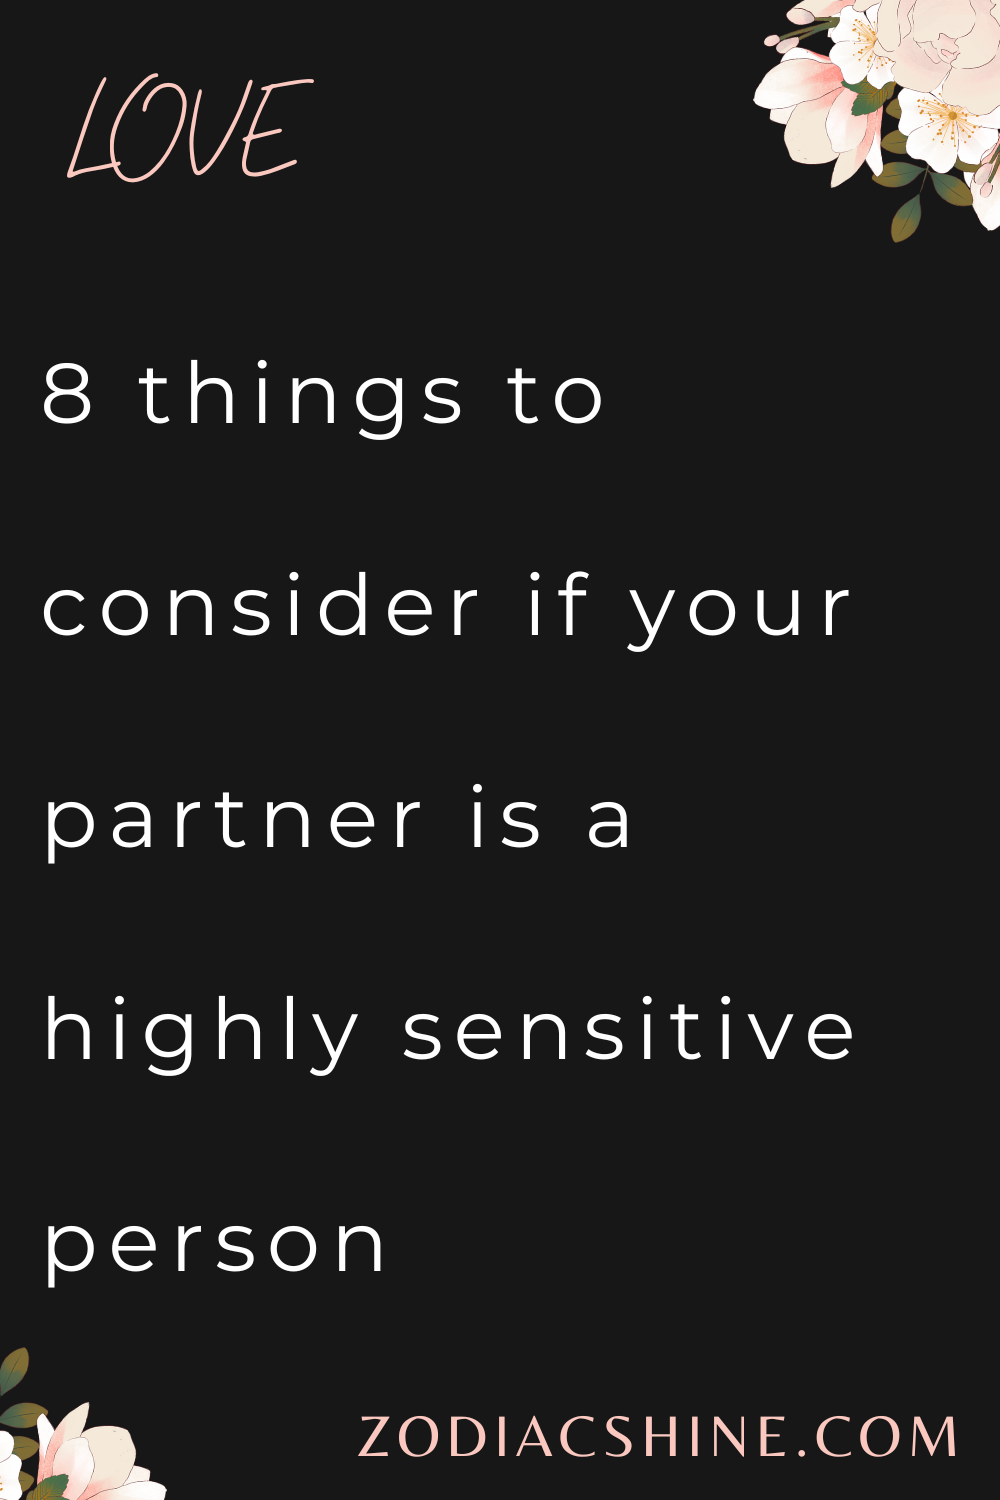 8 things to consider if your partner is a highly sensitive person